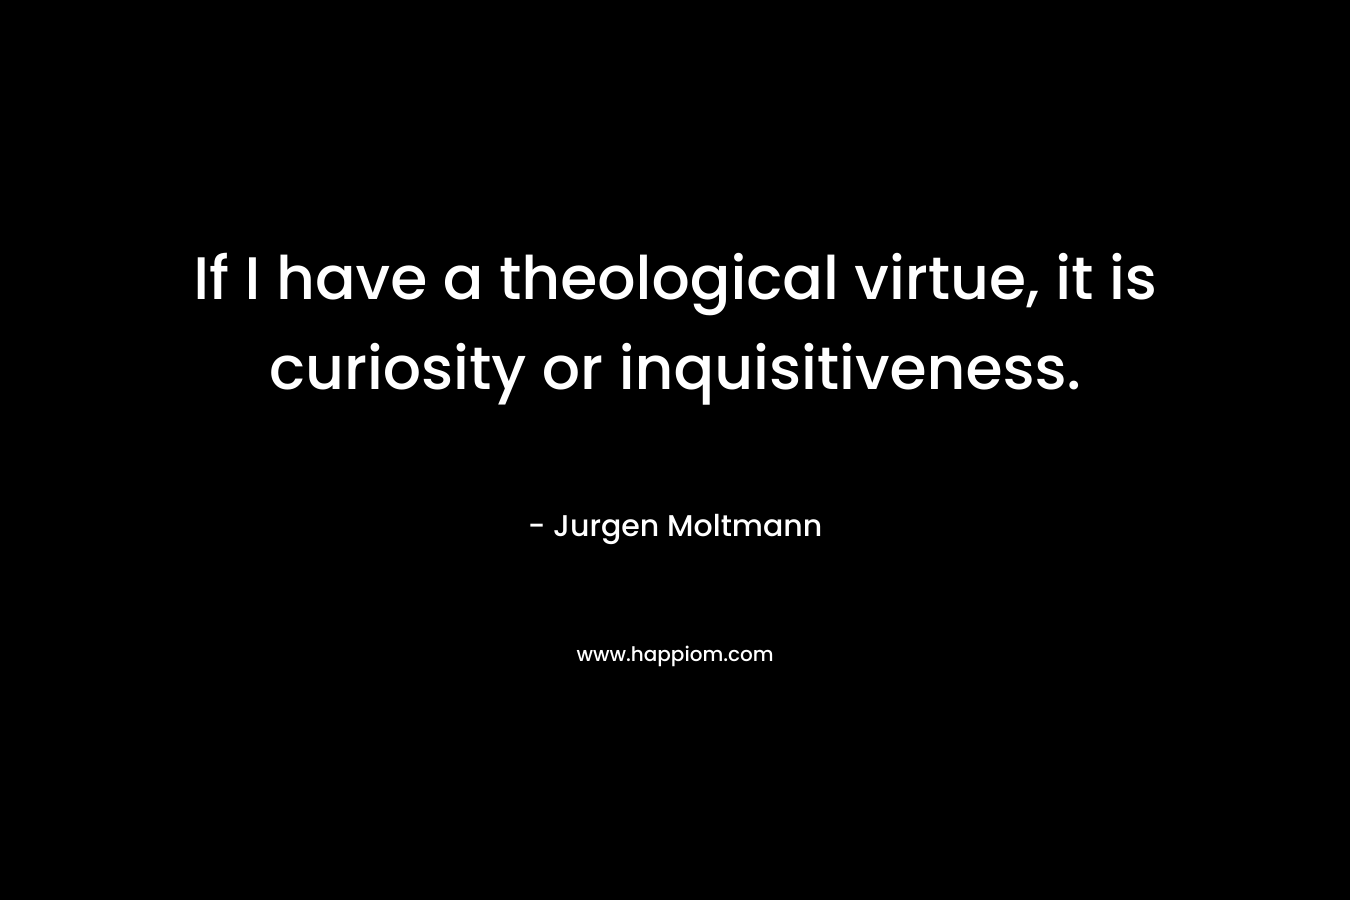 If I have a theological virtue, it is curiosity or inquisitiveness.